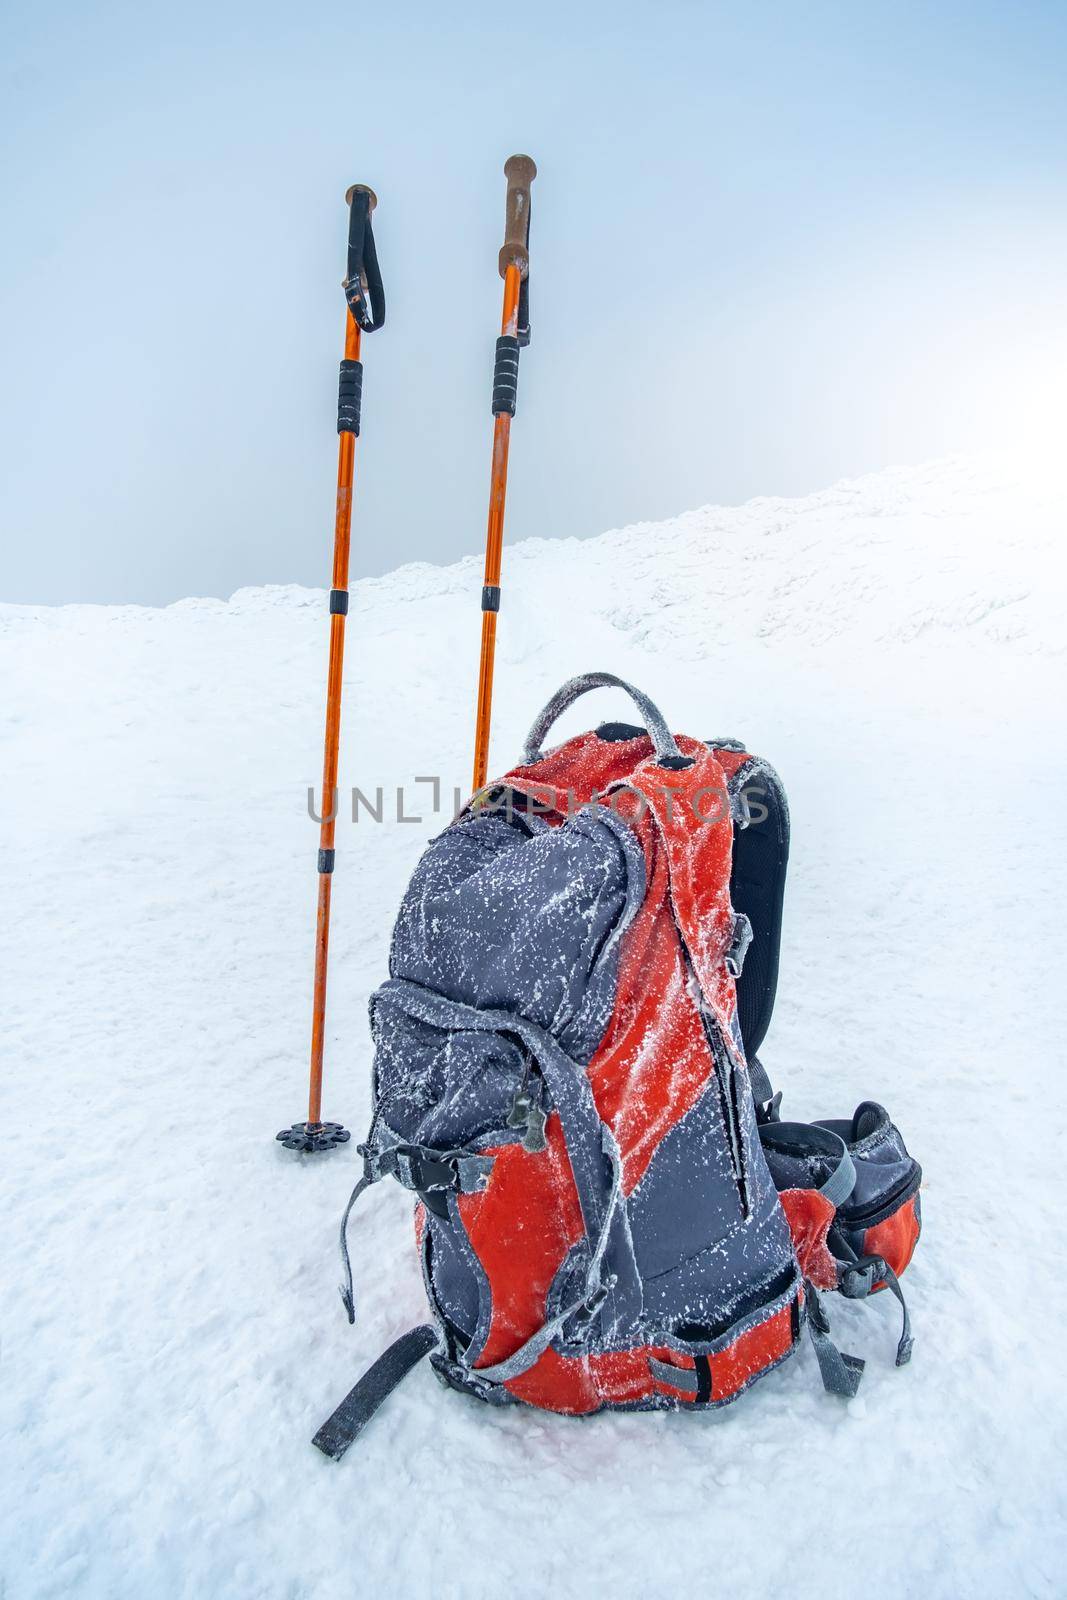 Trekking sticks and backpack standing on snow under clear winter sky